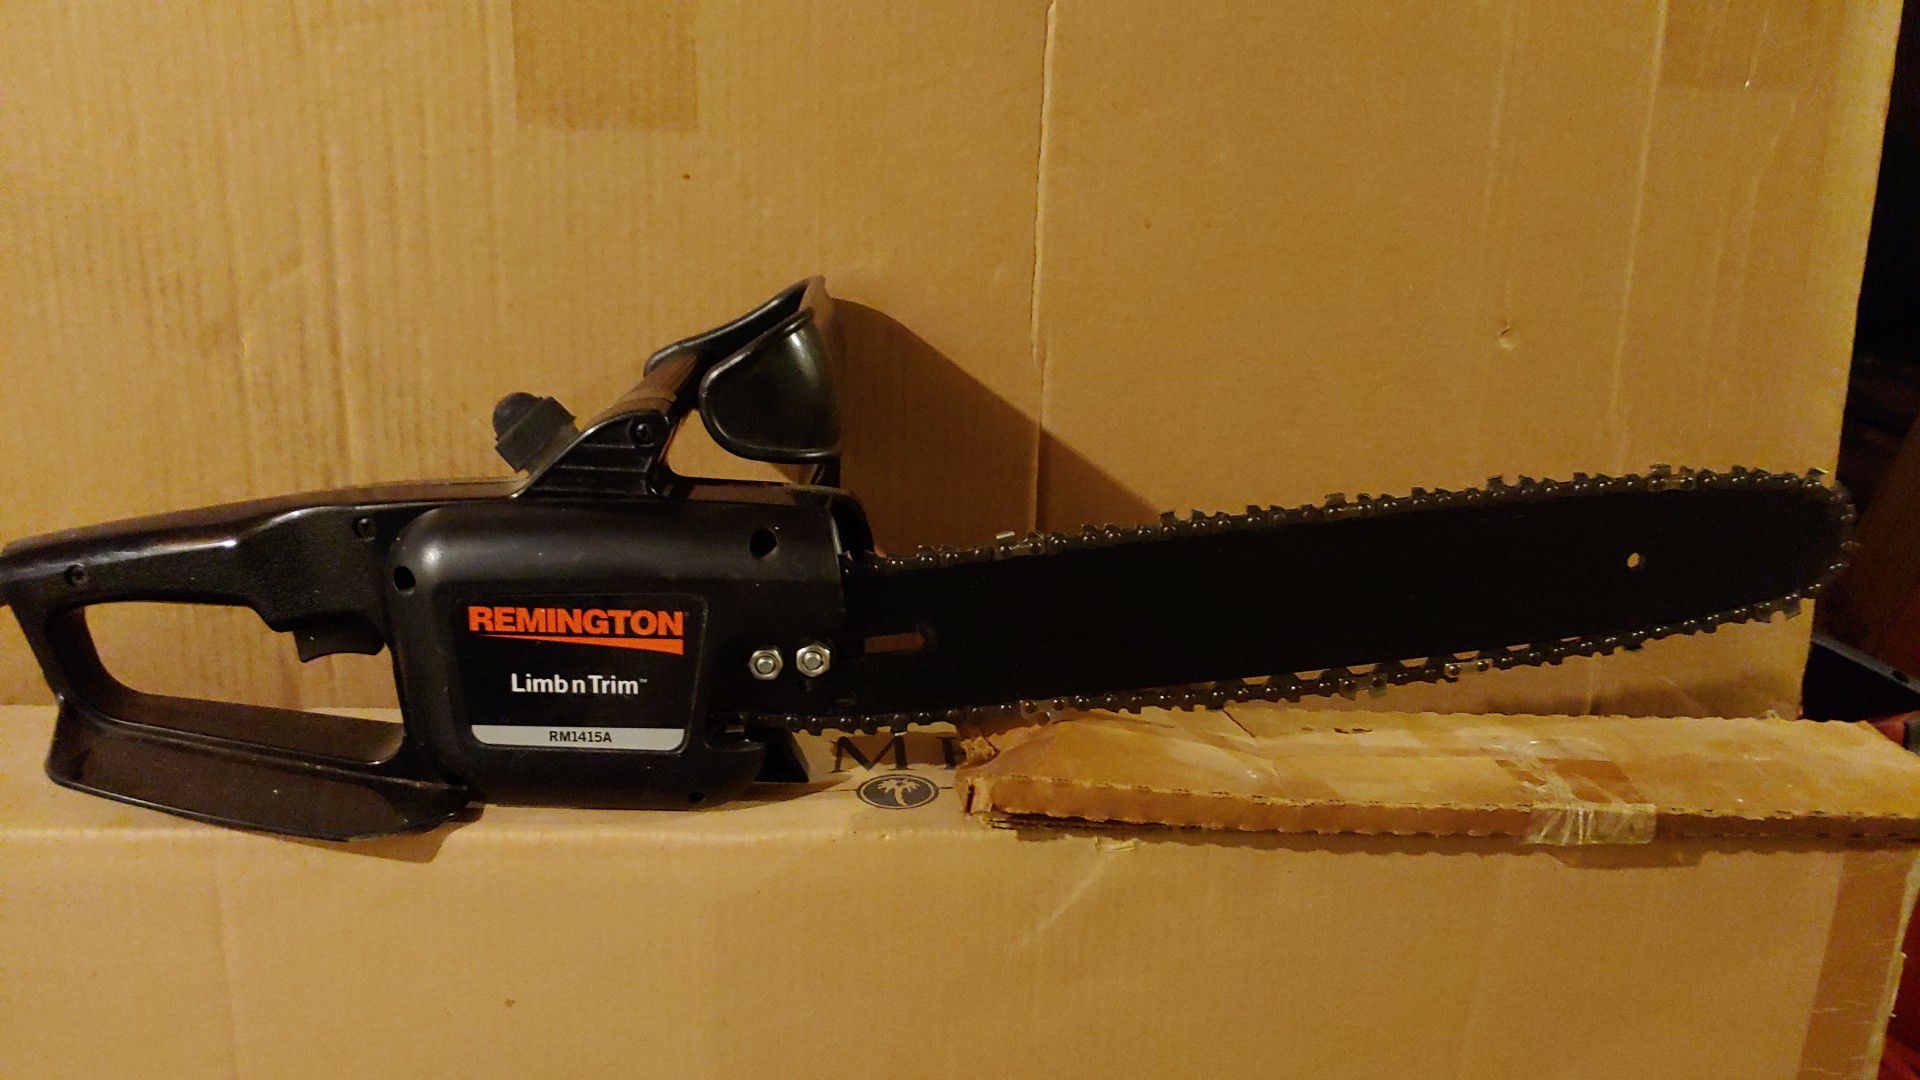 14 inch Remington limb and trim electric chainsaw $75 Serious Buyers Only